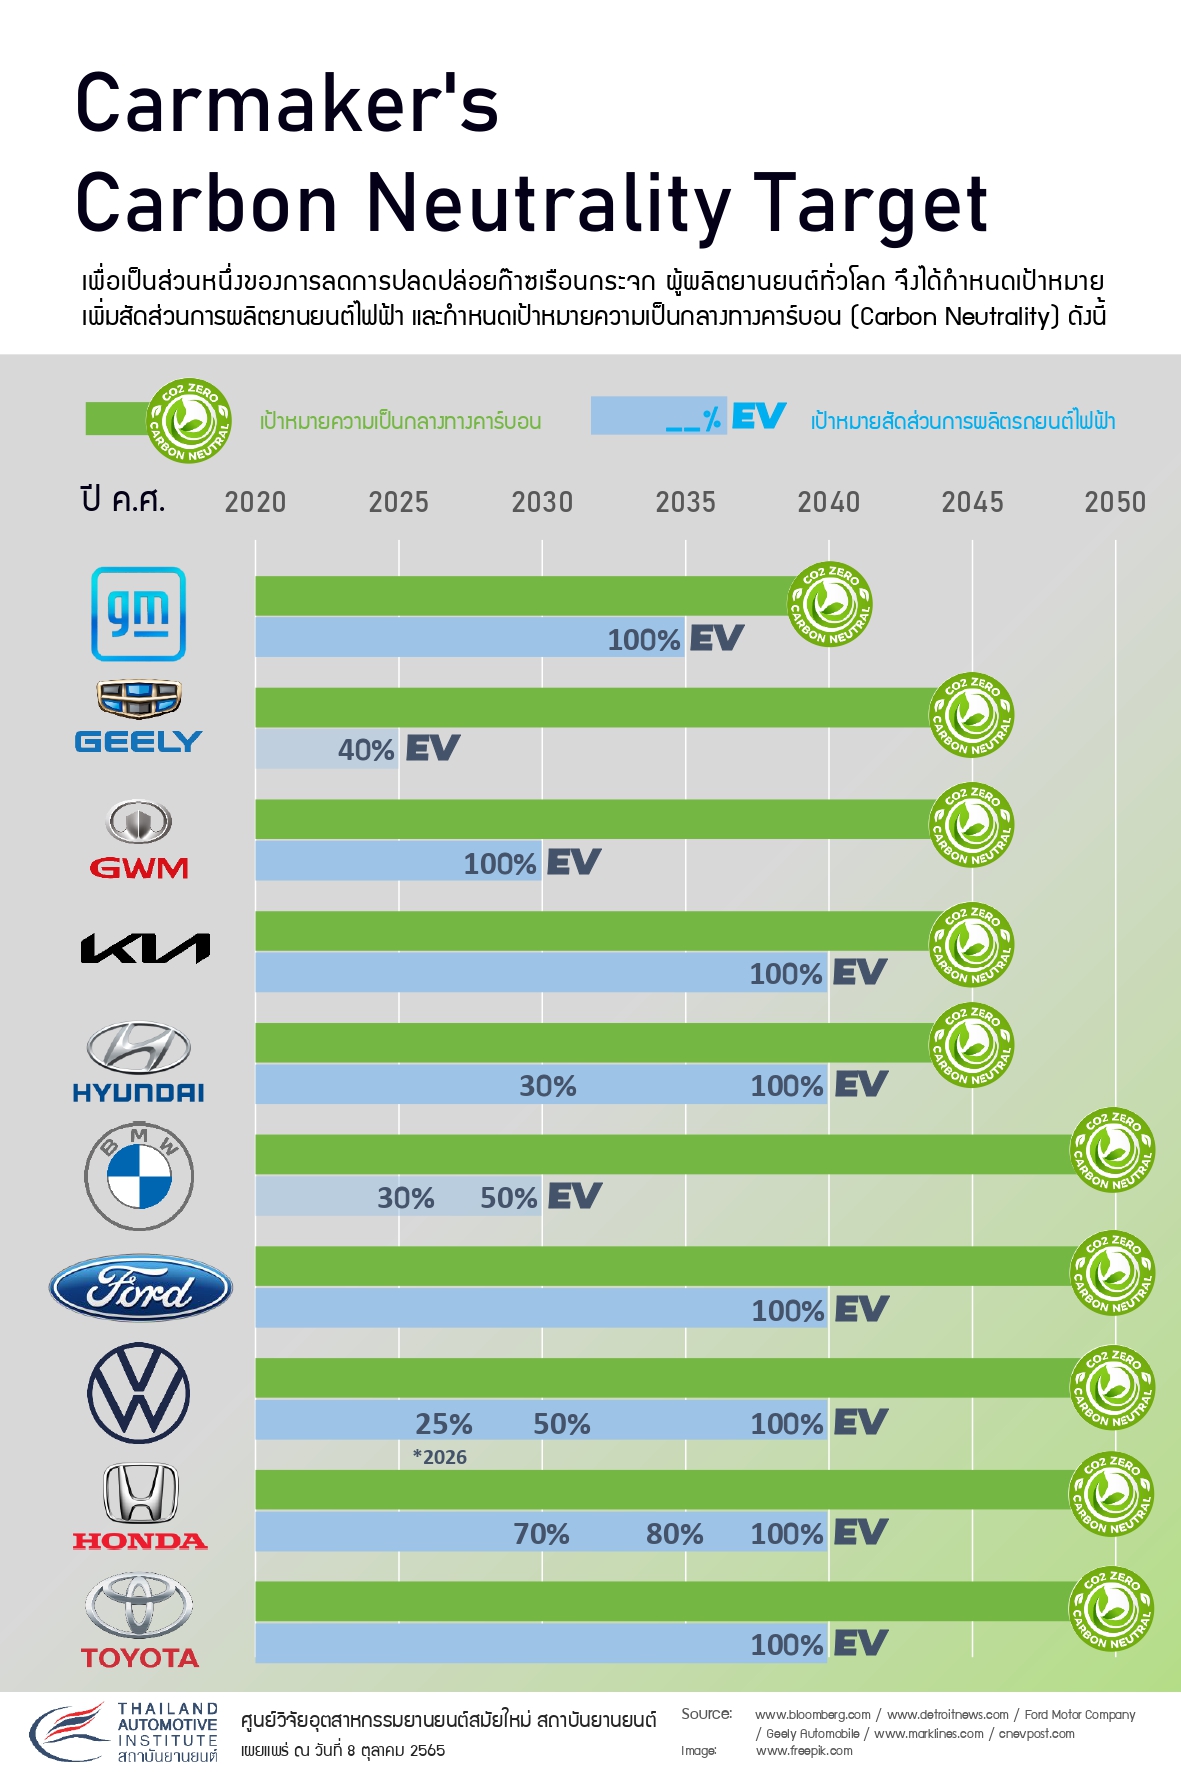 Carmaker's Carbon Neutrality Target